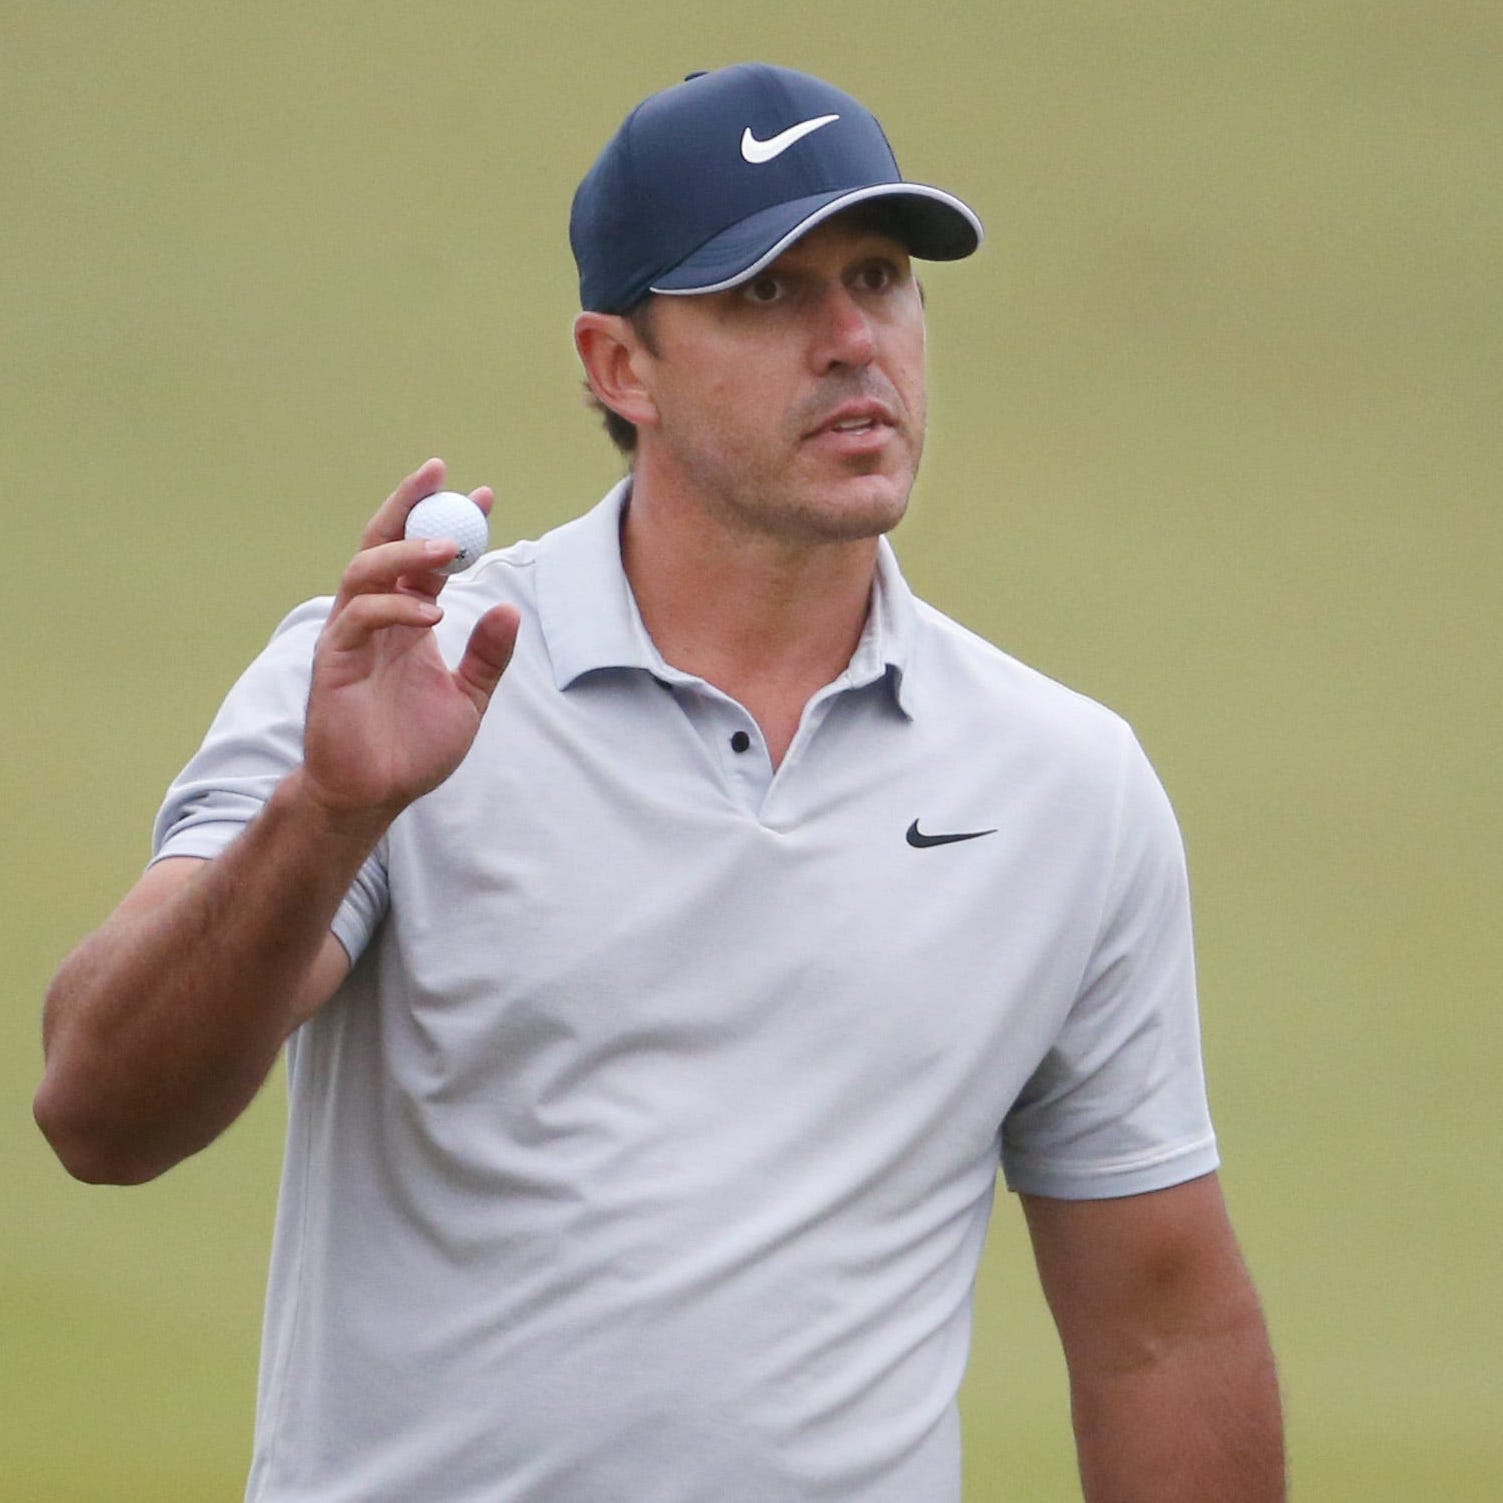 Brooks Koepka has a one-shot lead entering the final round of the PGA Championship.